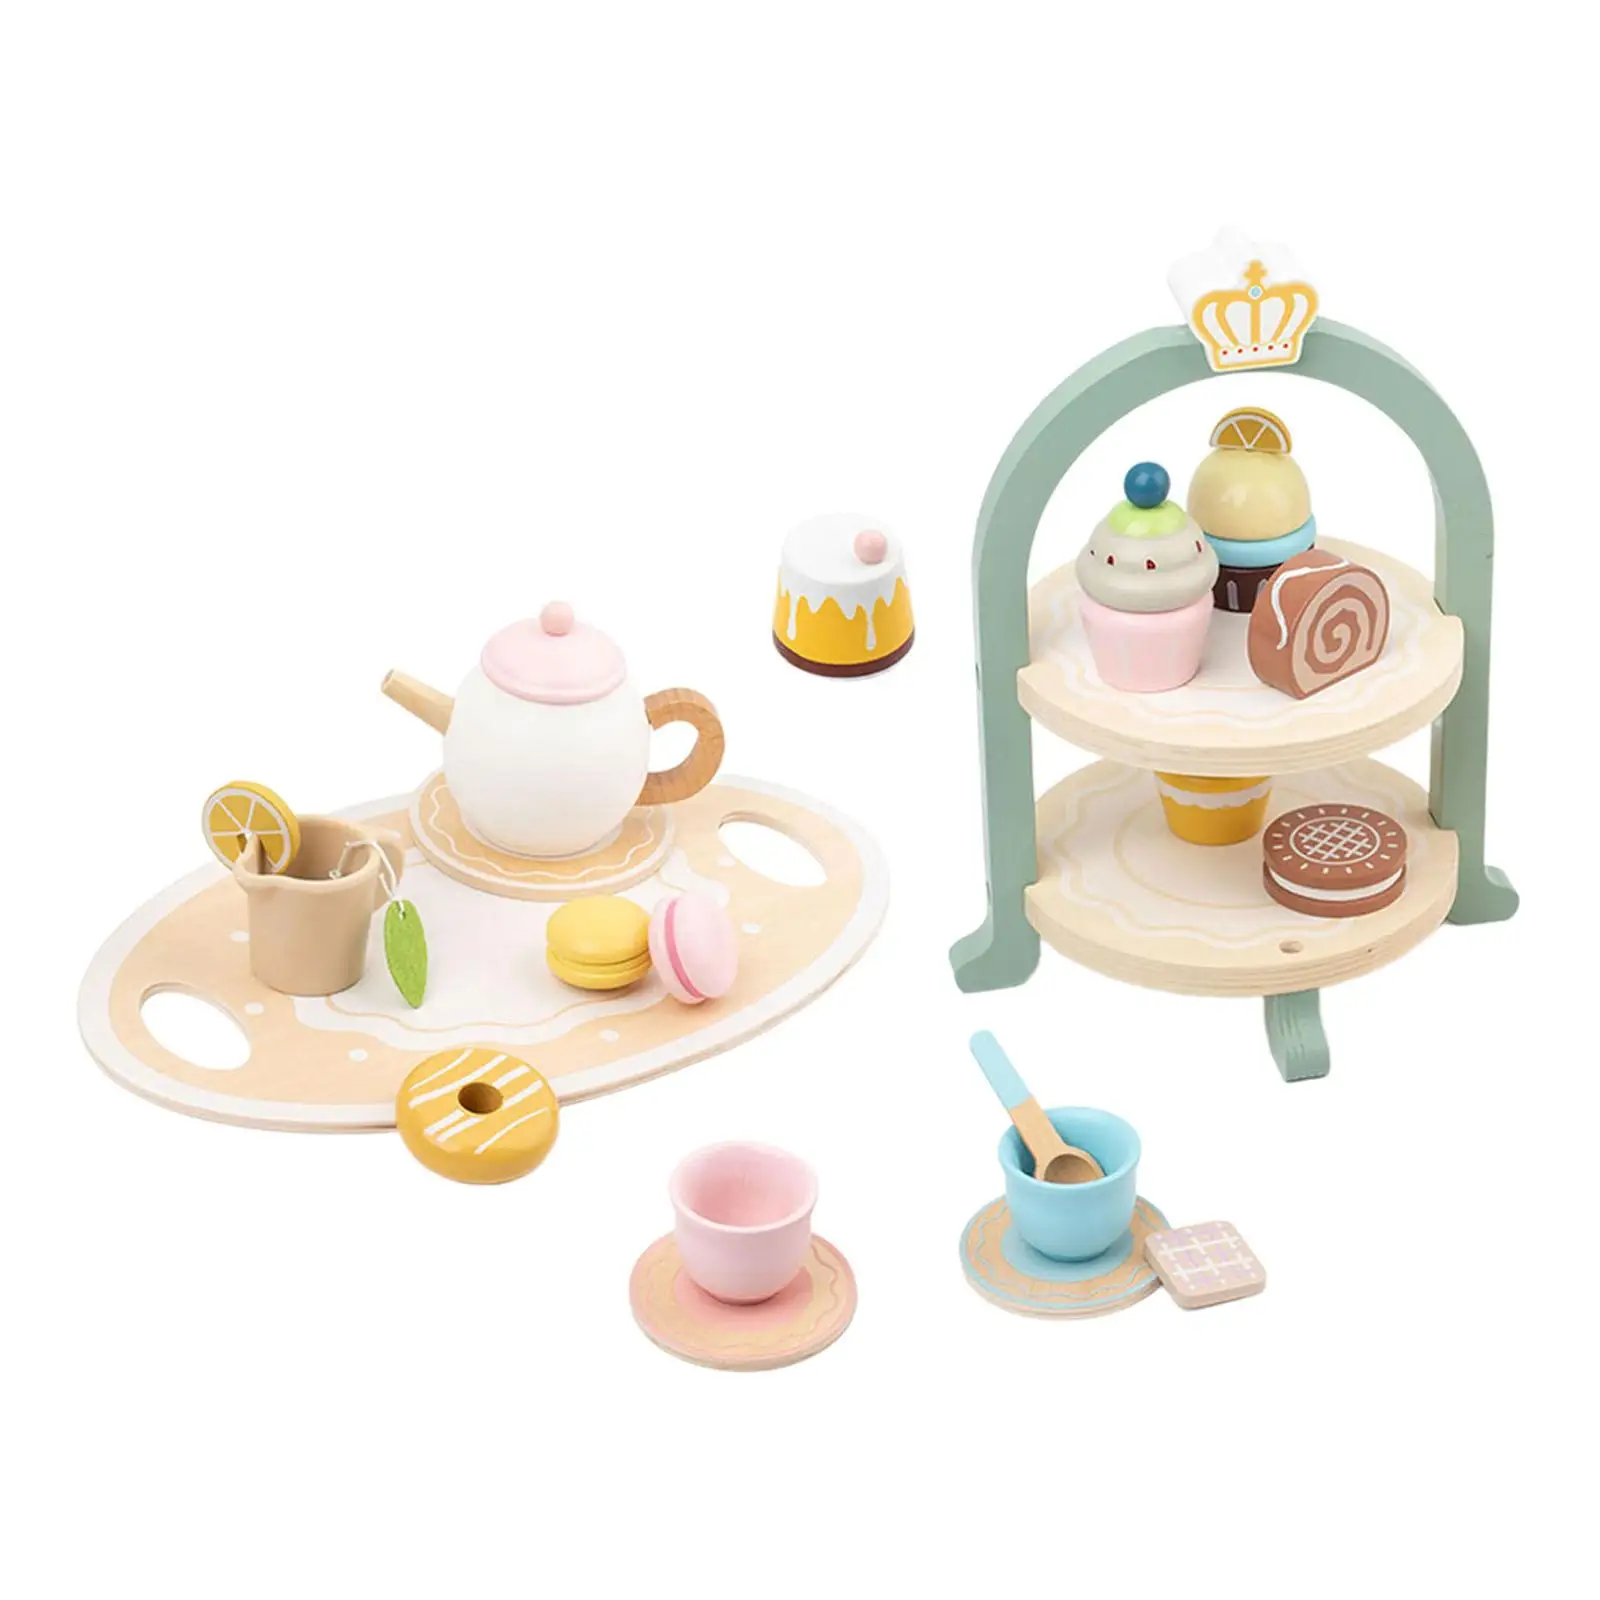 Kids Afternoon Tea Toy Set, Little Girls Tea Party Pretend Play for 3 4 5 6